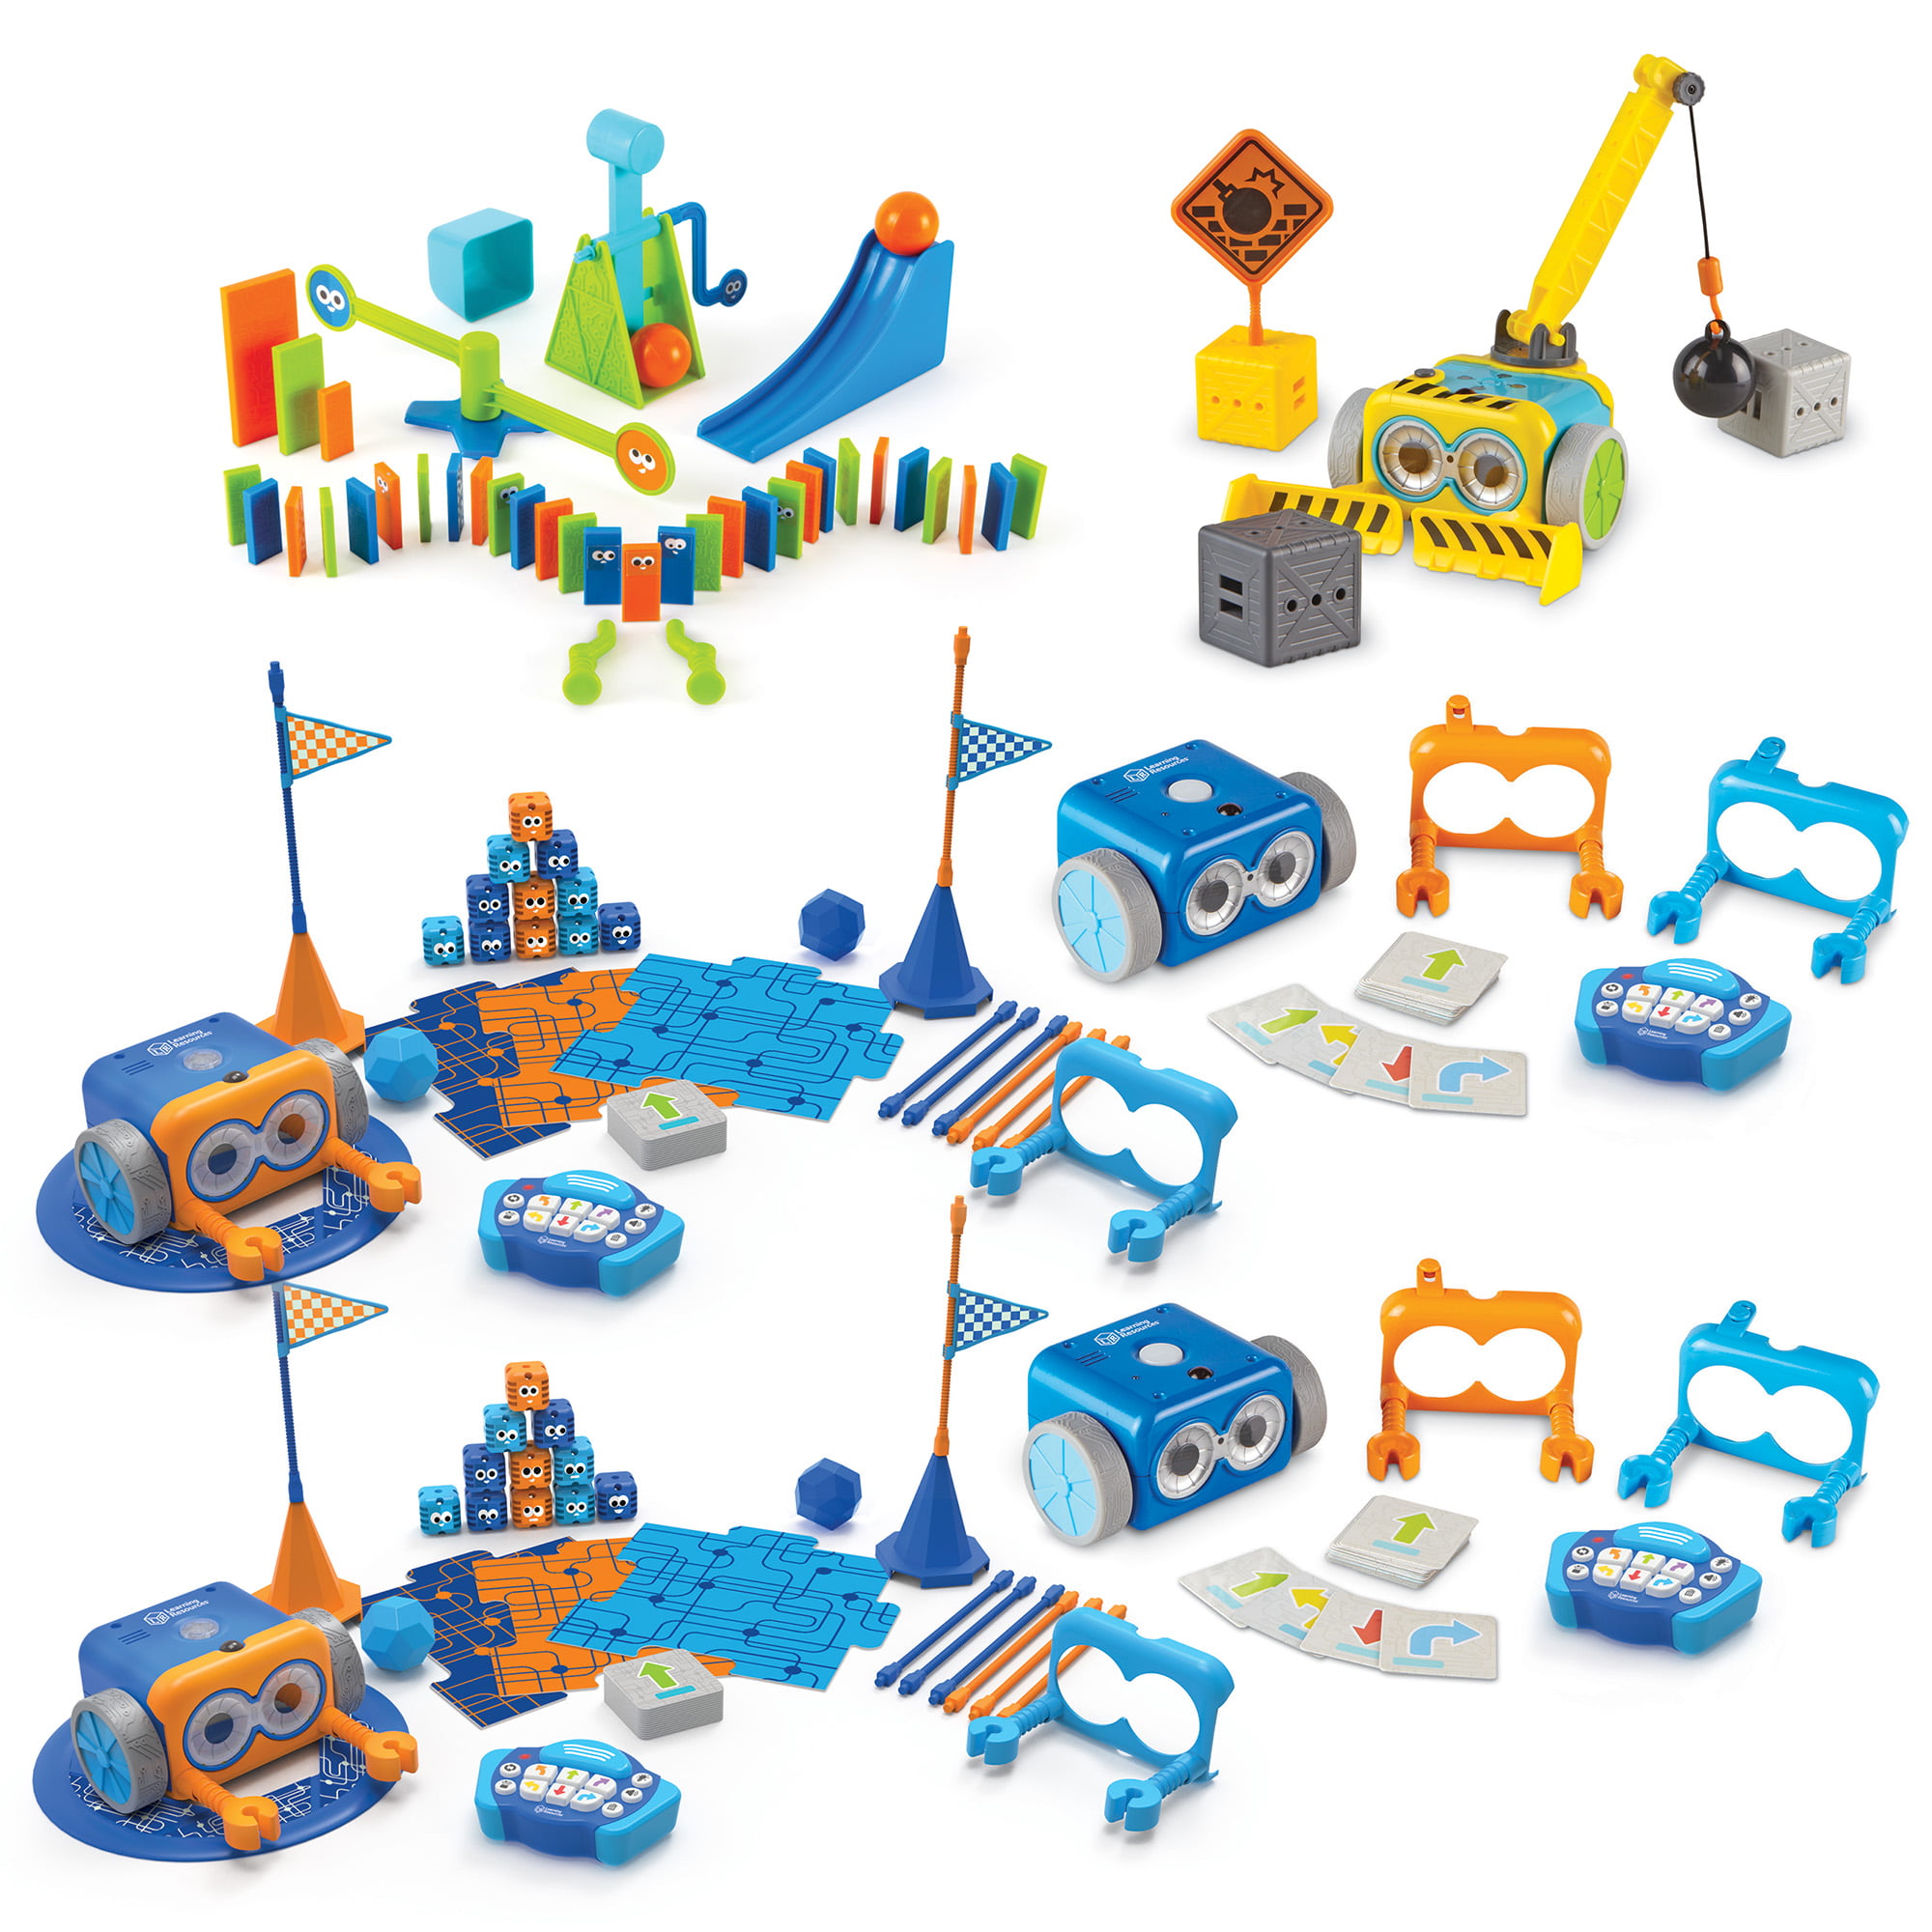  Learning Resources Botley the Coding Robot 2.0 - 46 pieces,  Ages 5+ Coding Robot for Kids, STEM Toys, Programming for Kids, Electronic  Learning for Kids, Screen-Free Toys : Toys & Games